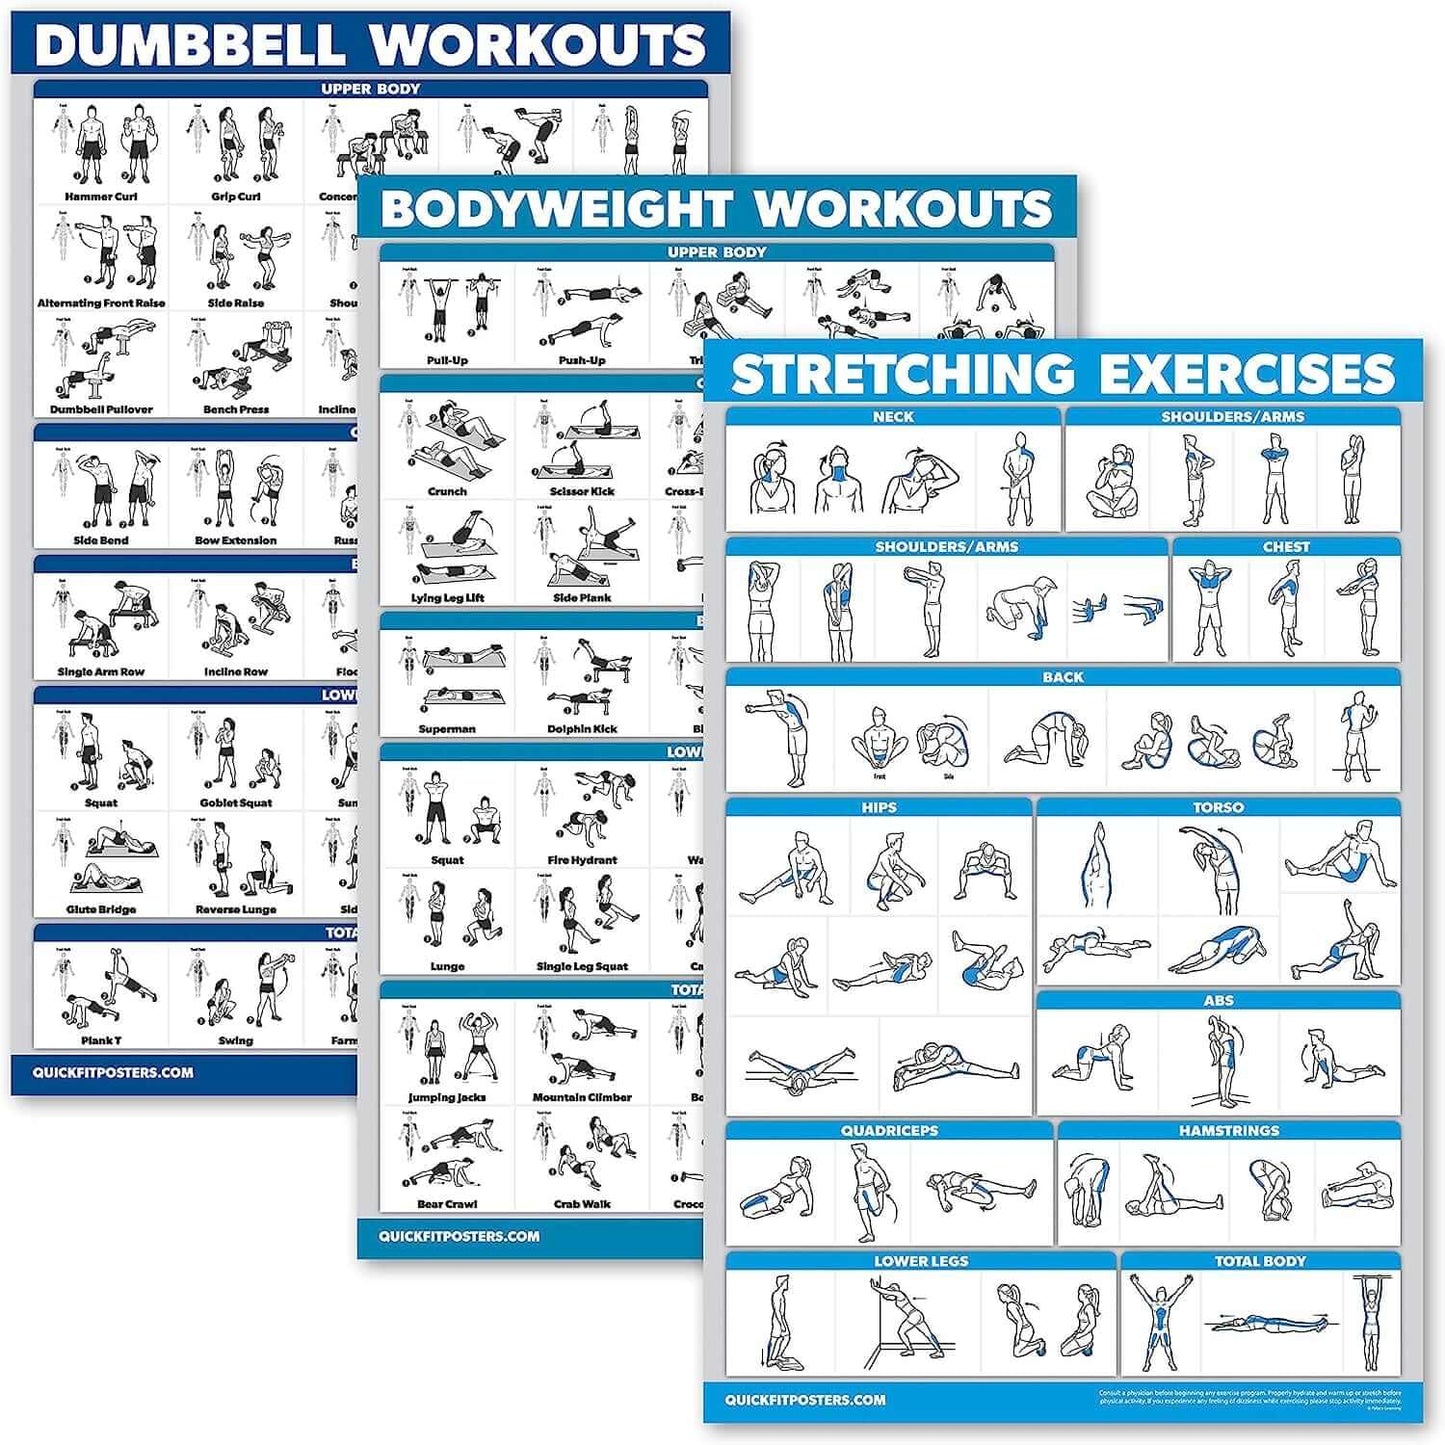 Eclipse Martial Art Supplies sporting goods QuickFit 3 Pack - Dumbbell Workouts + Bodyweight Exercises + Stretching Routine Poster Set - Set of 3 Workout Charts